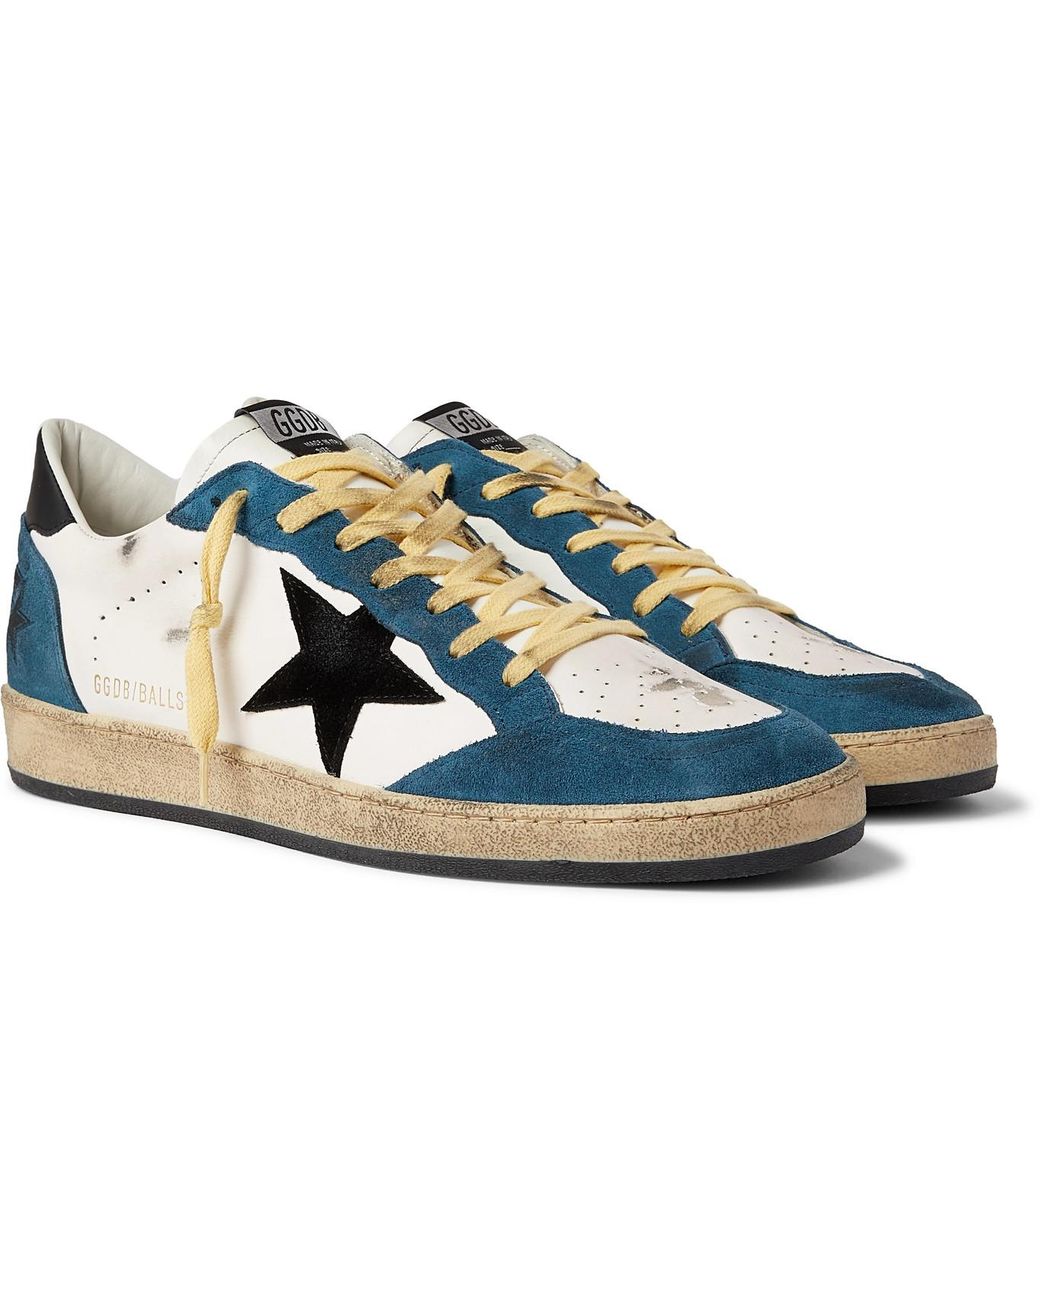 Golden Goose Deluxe Brand Ballstar Distressed Leather And Suede ...